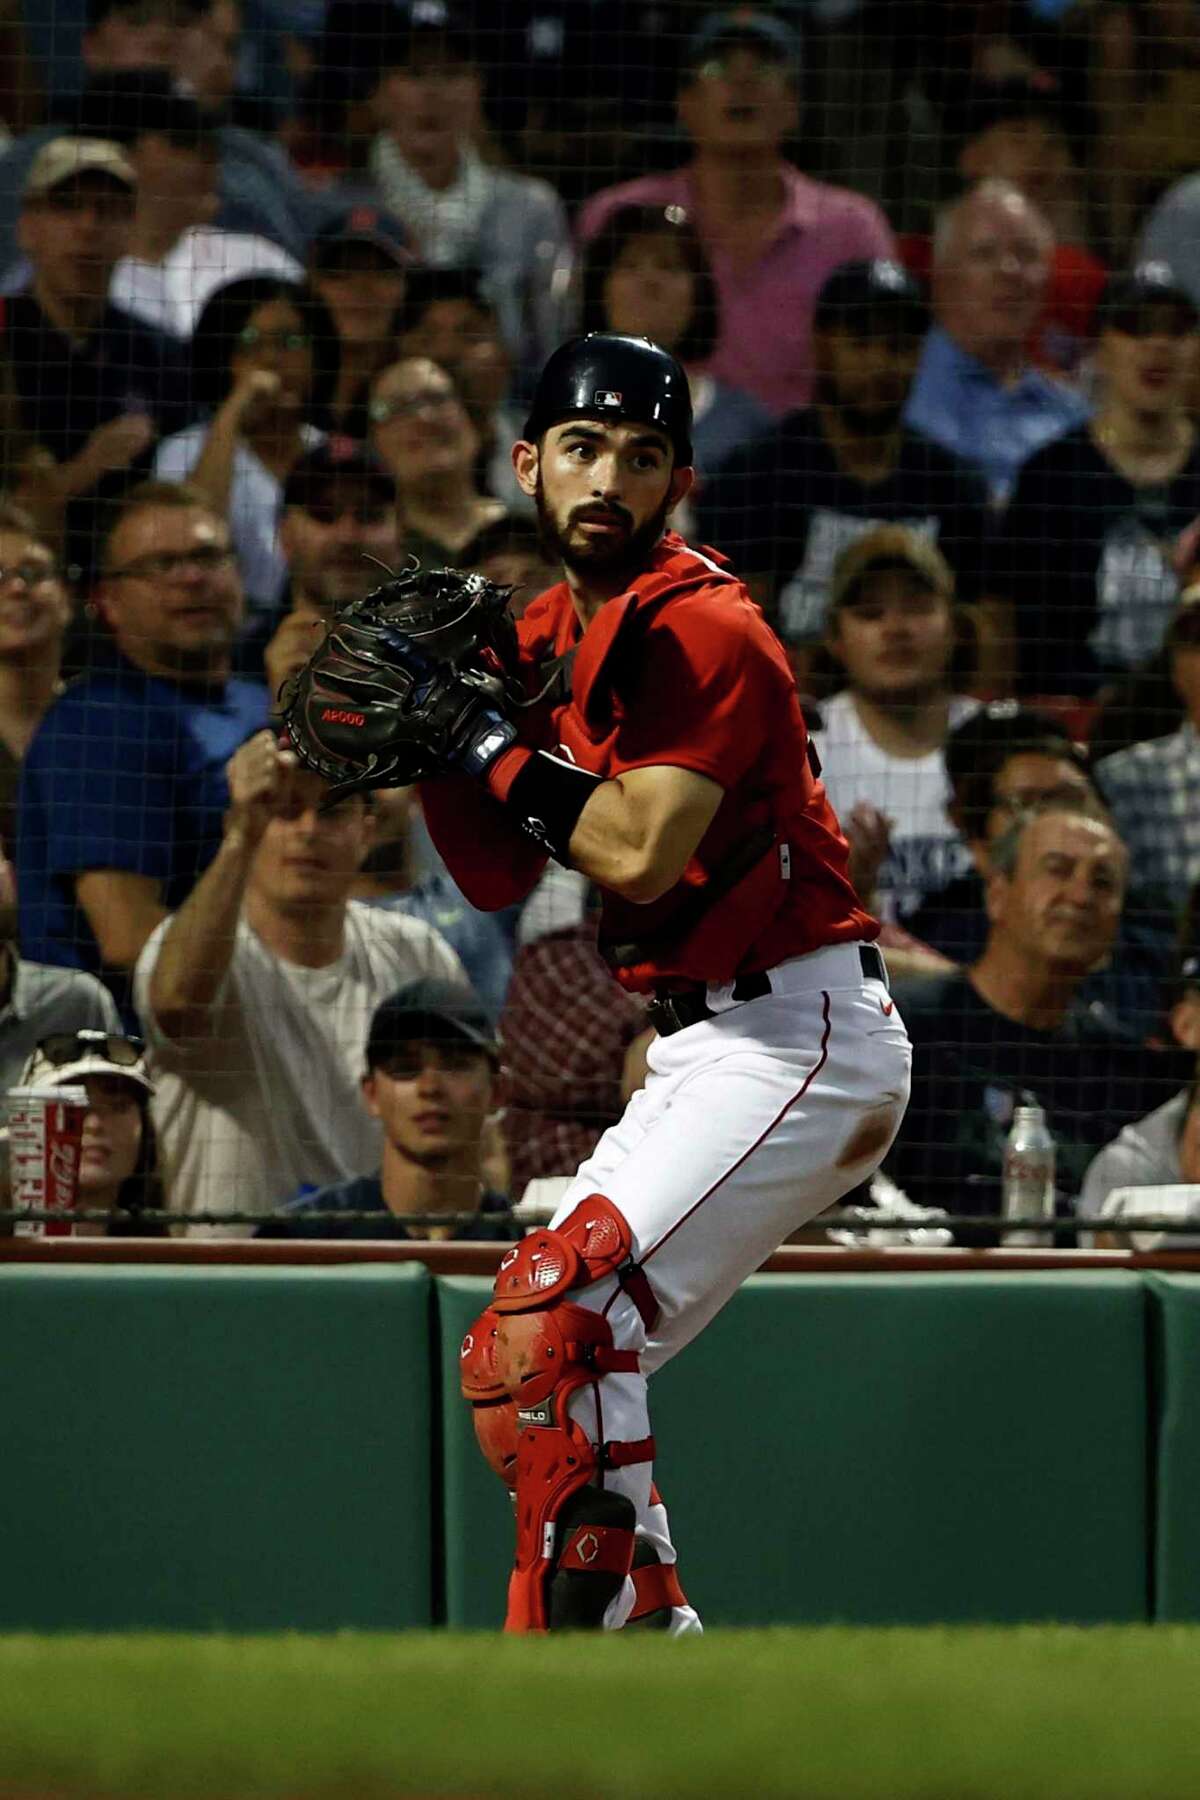 Boston Red Sox's Connor Wong records hit in first MLB at-bat but 'calmness'  catching Nathan Eovaldi was even more impressive 